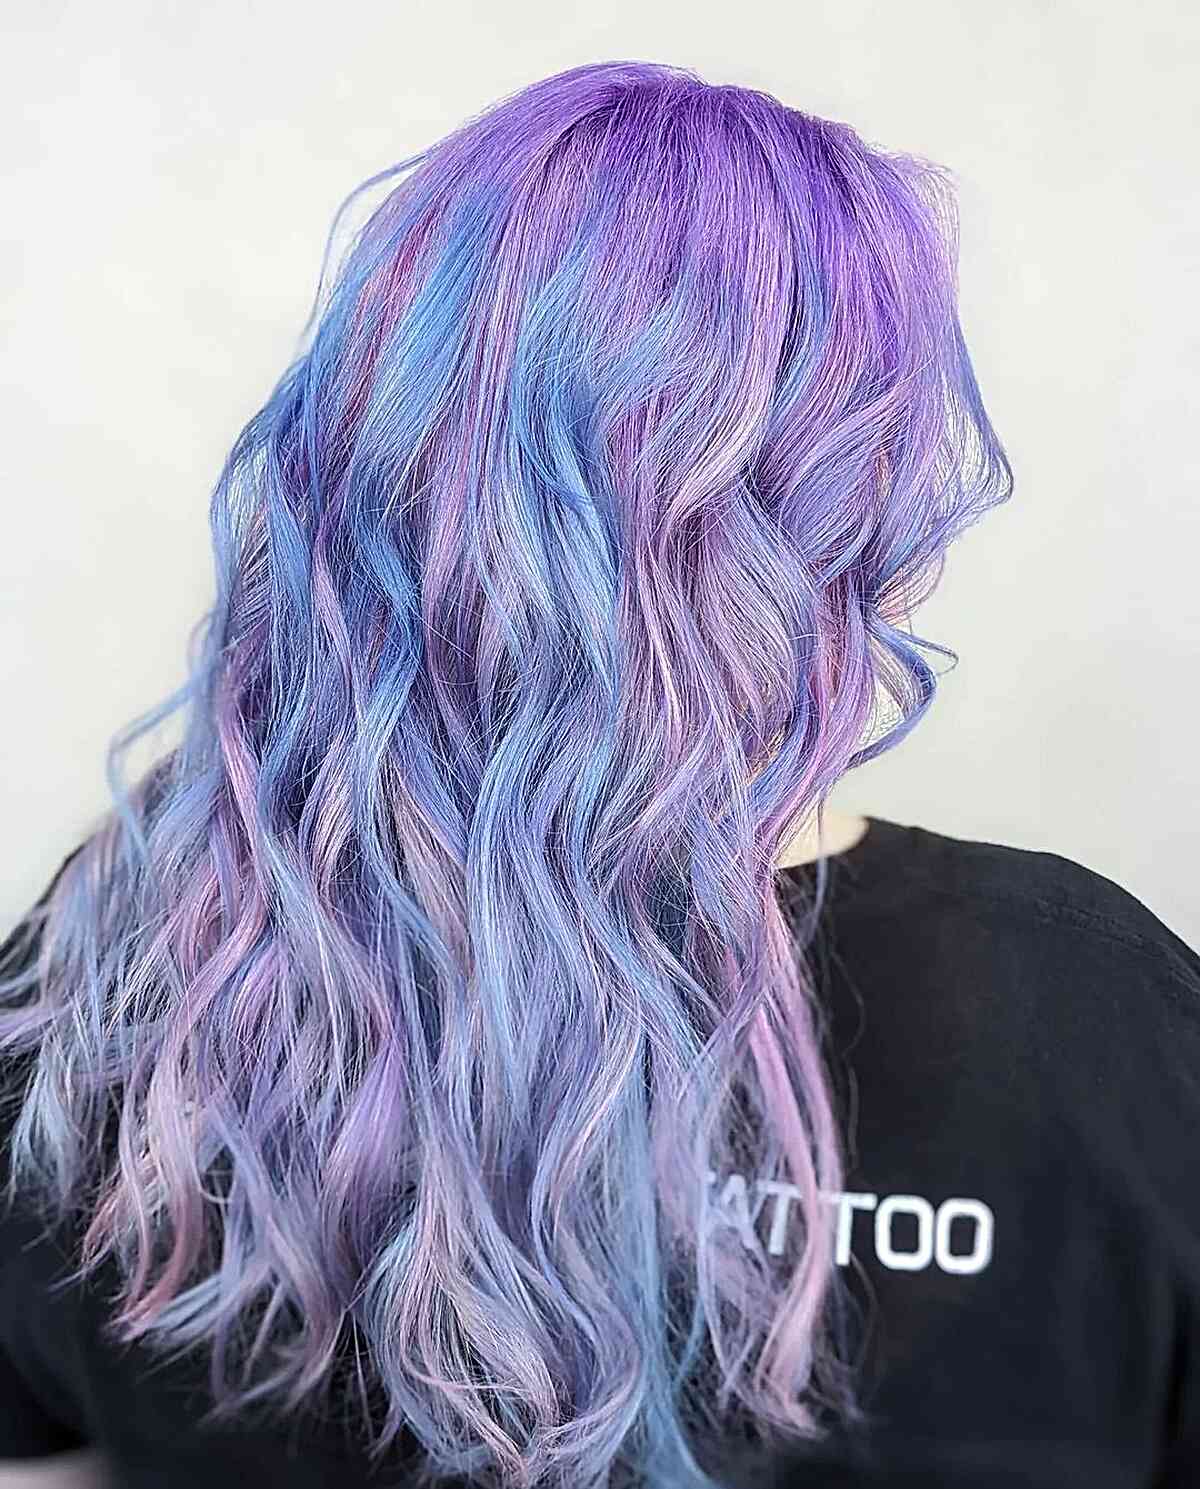 Long-Length Beach Waves with Blue-Purple Cotton Candy Hues